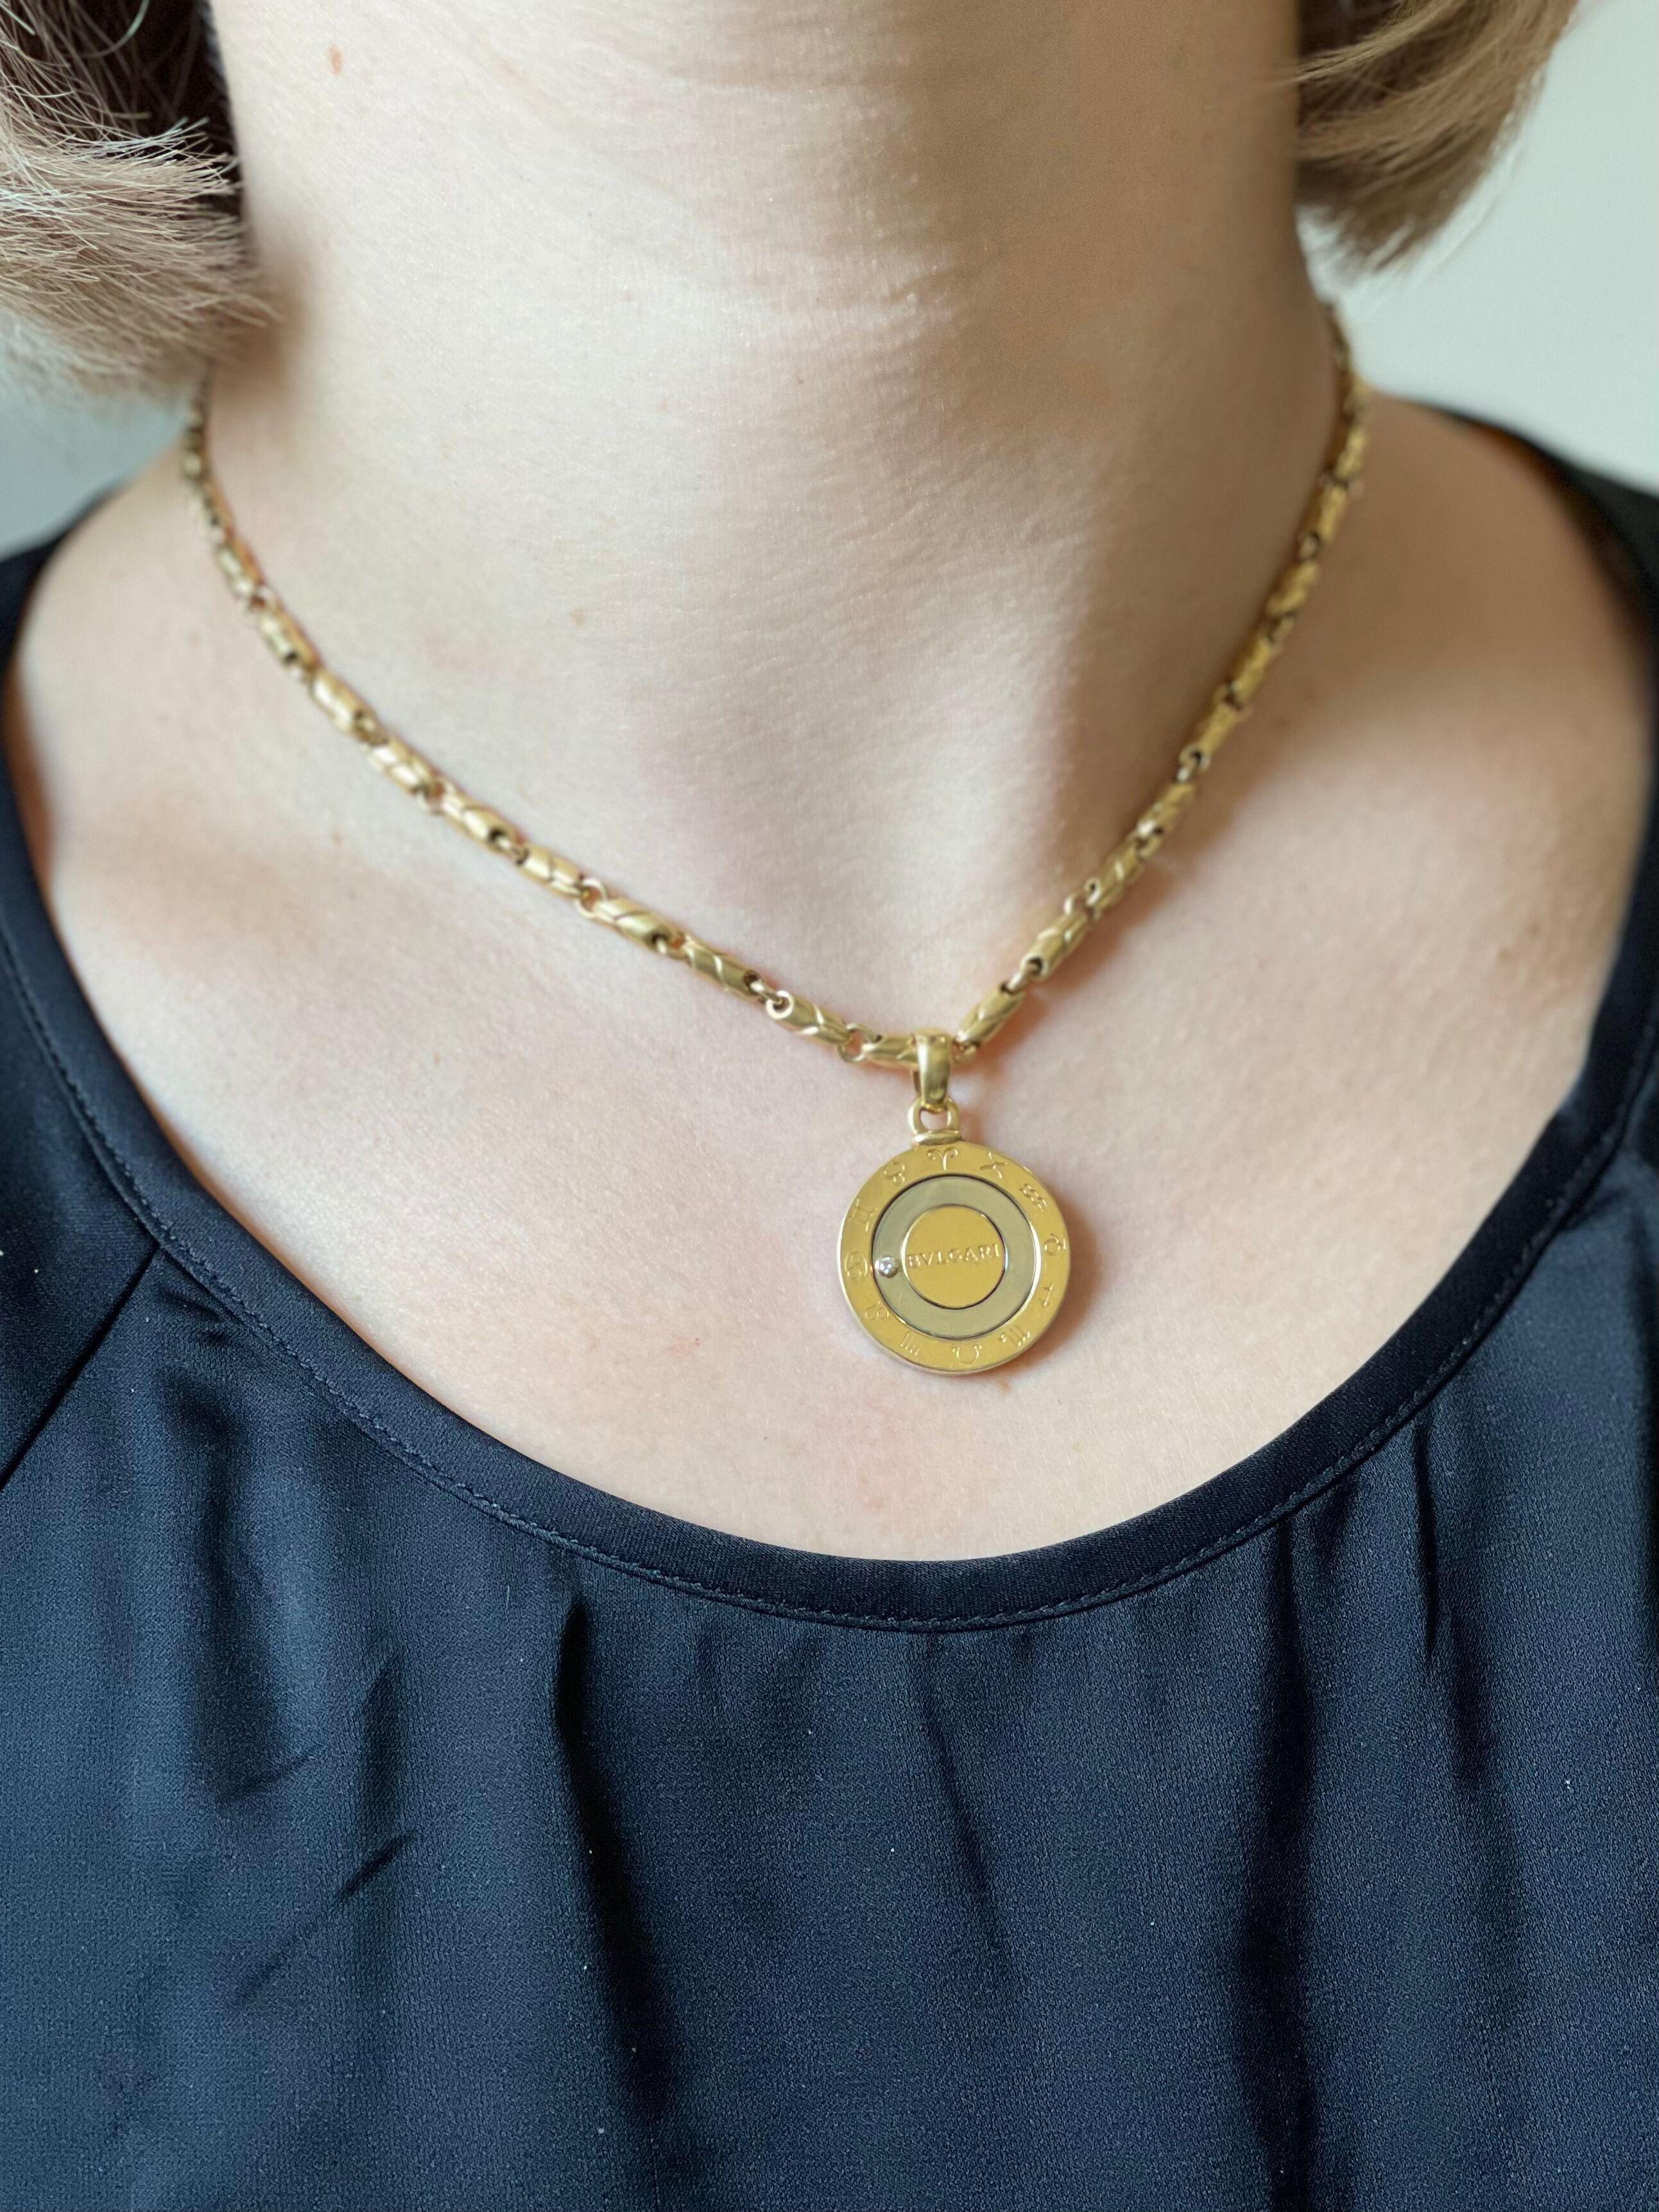 18k gold and stainless steel Zodiac pendant on an 18k gold chain necklace, both crafted by Bvlgari. Pendant depicting all 12 Zodiac signs, with one G/VS diamond. Necklace is 15.75